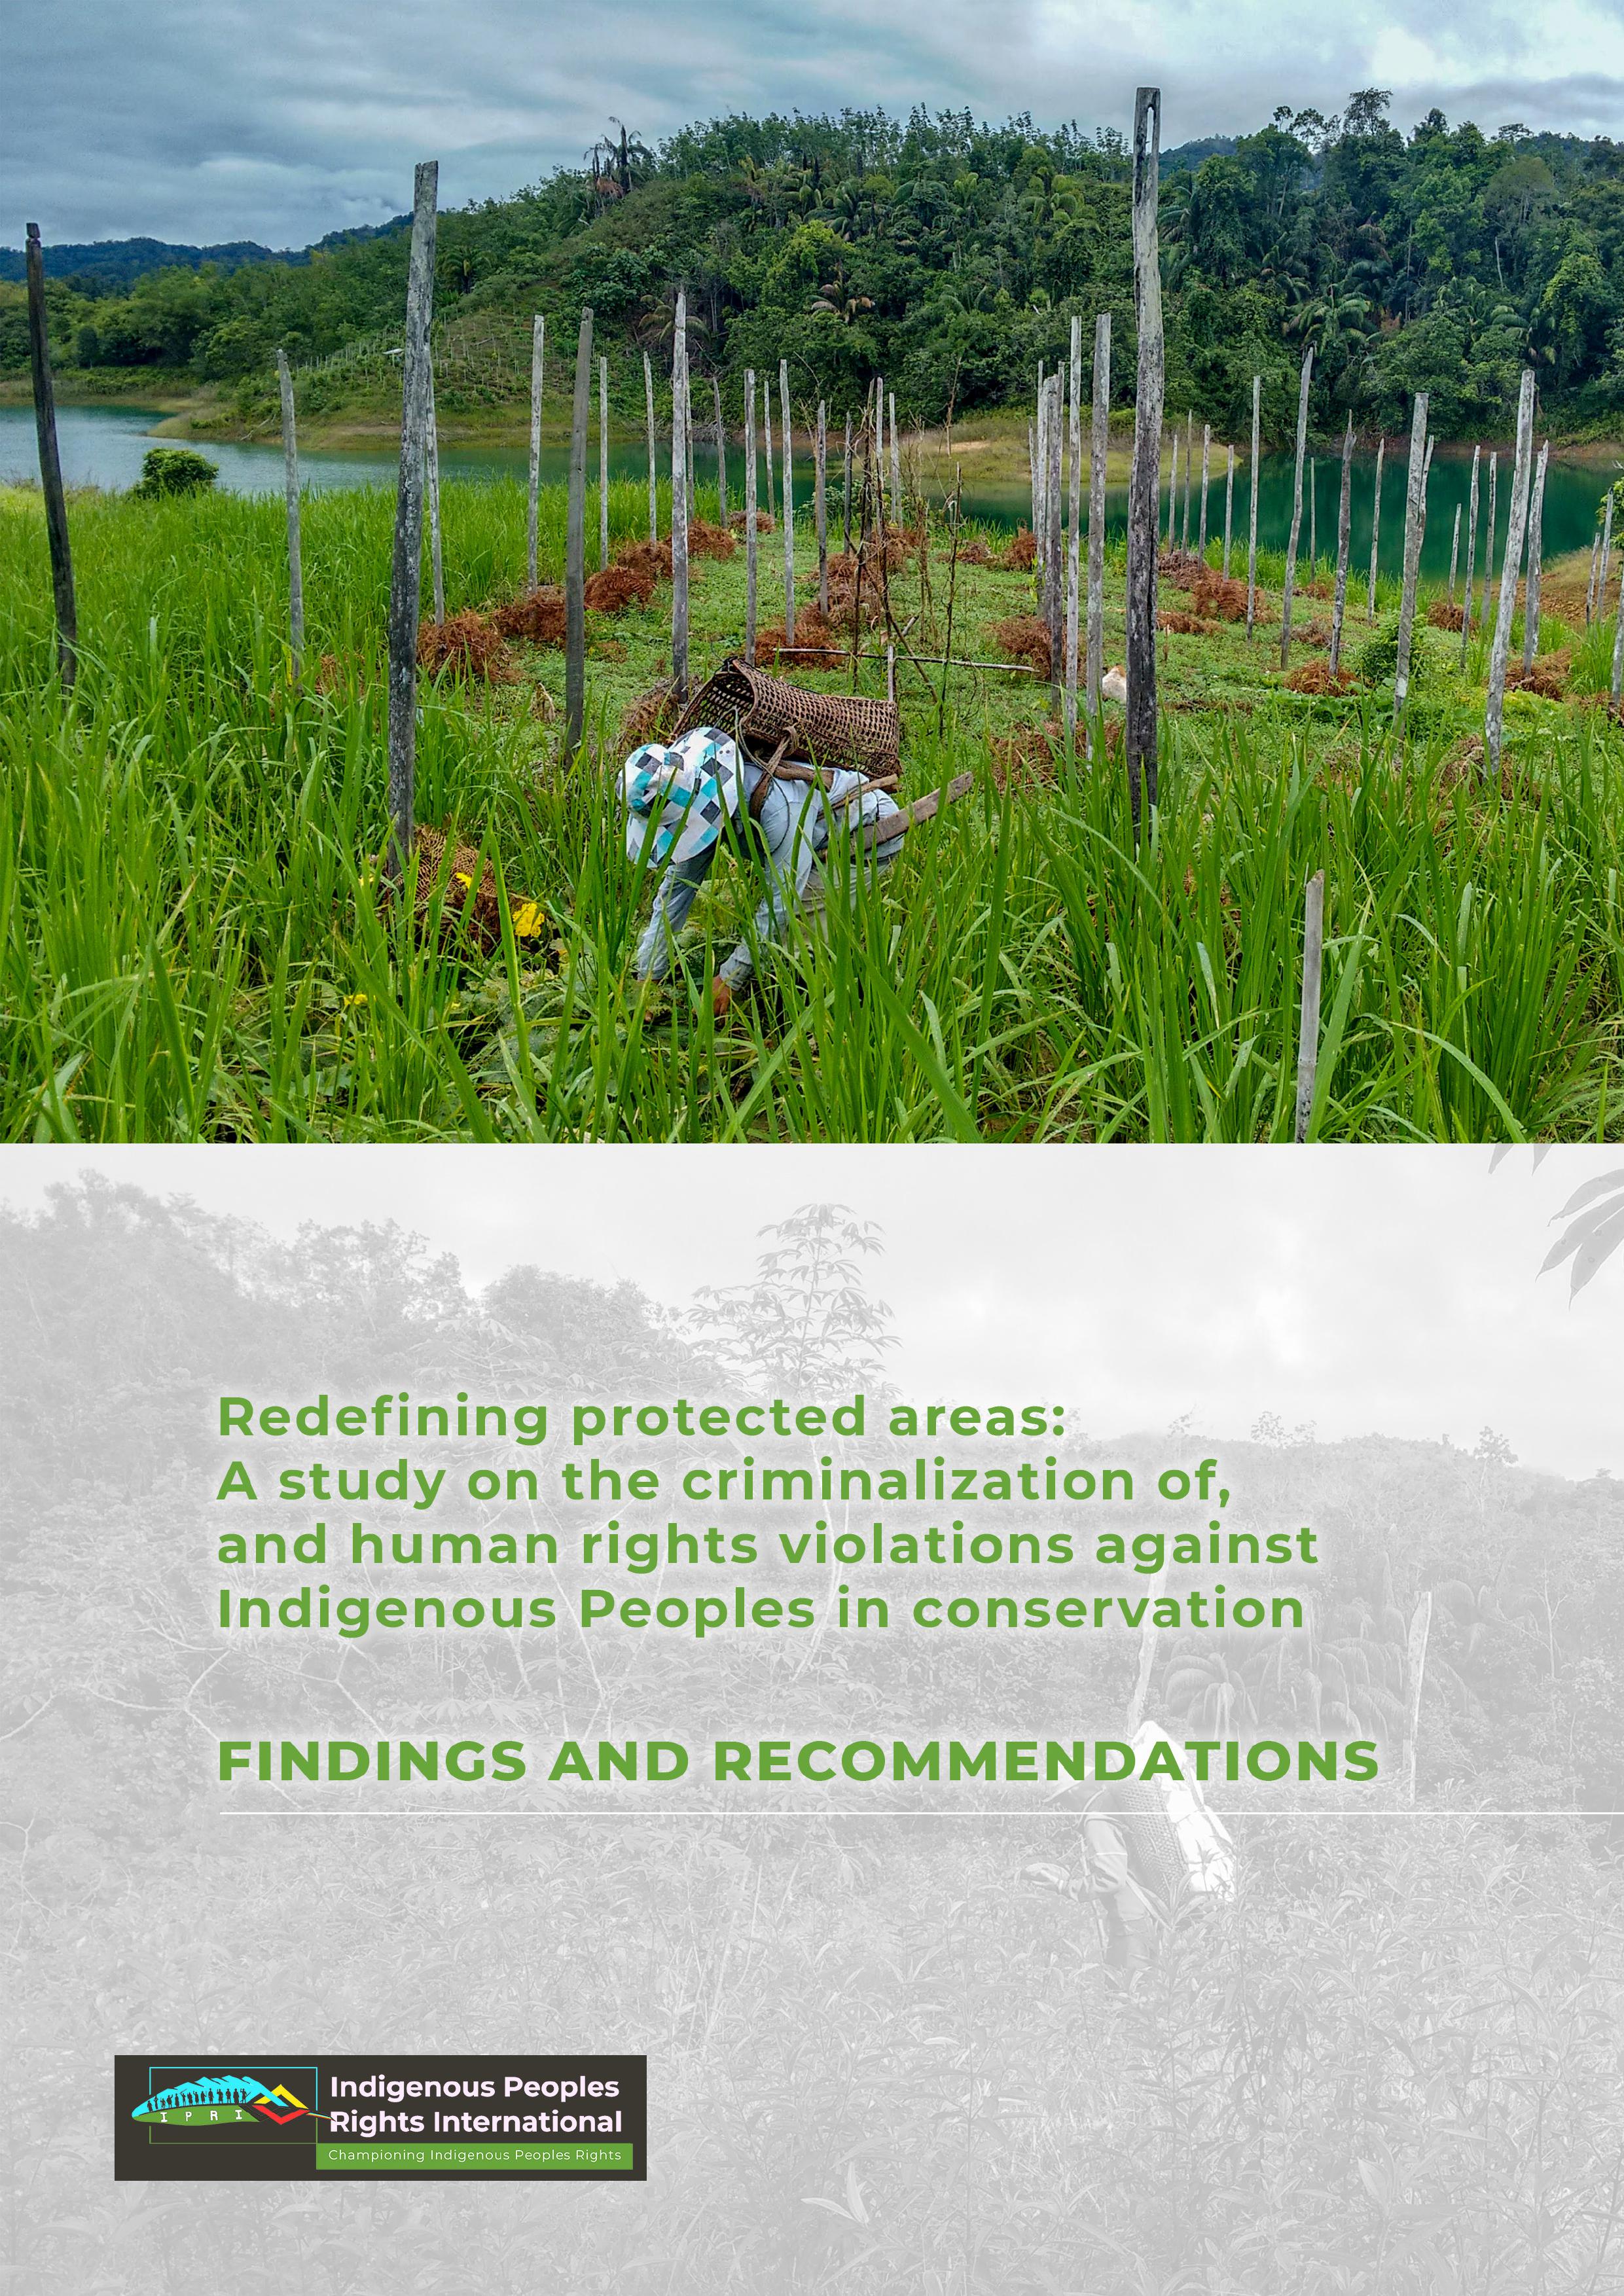 Findings and Recommendations: Redefining Protected Areas